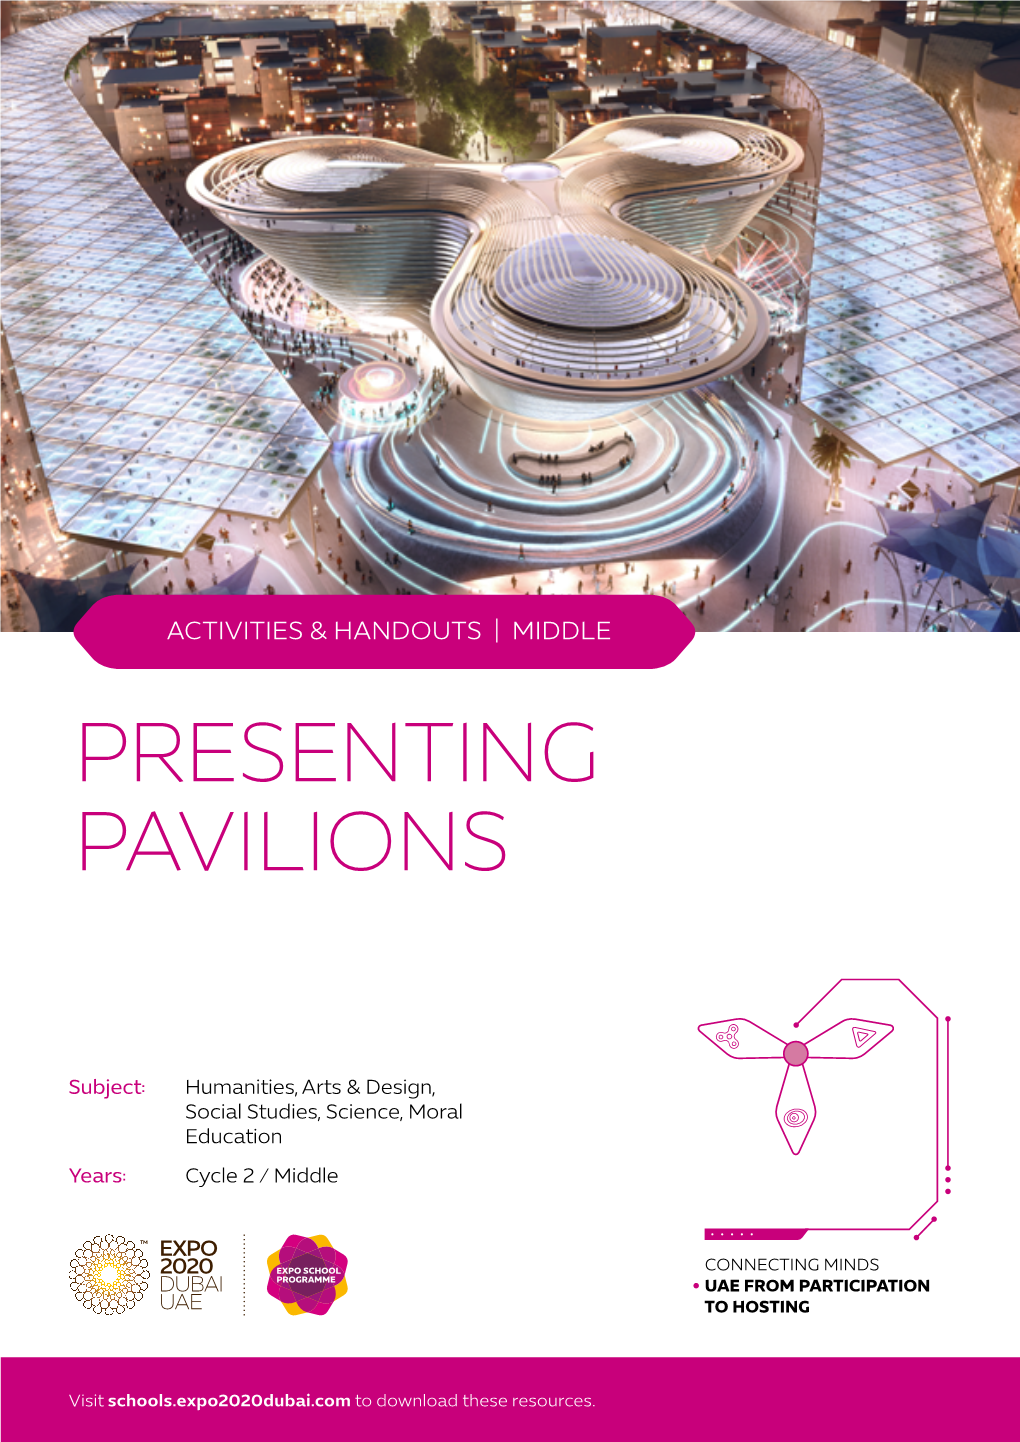 Middle Cycle2 Handout – Presenting Pavilions